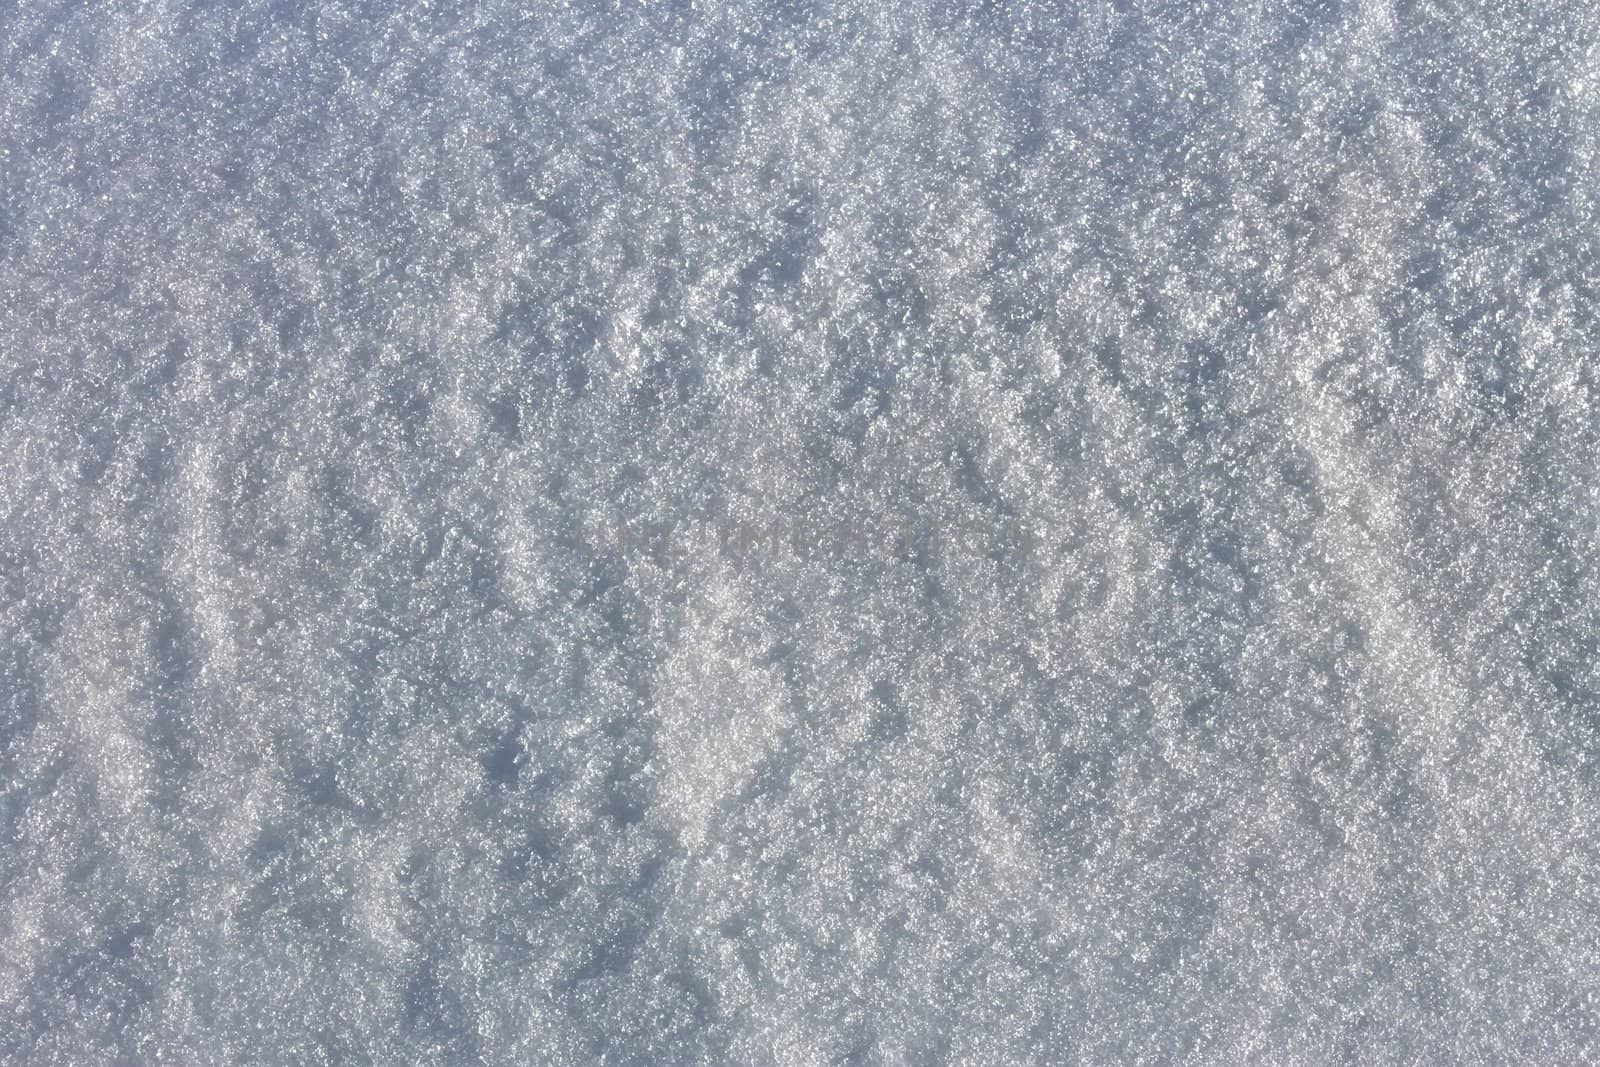 Texture of the snow with a bluish gleam